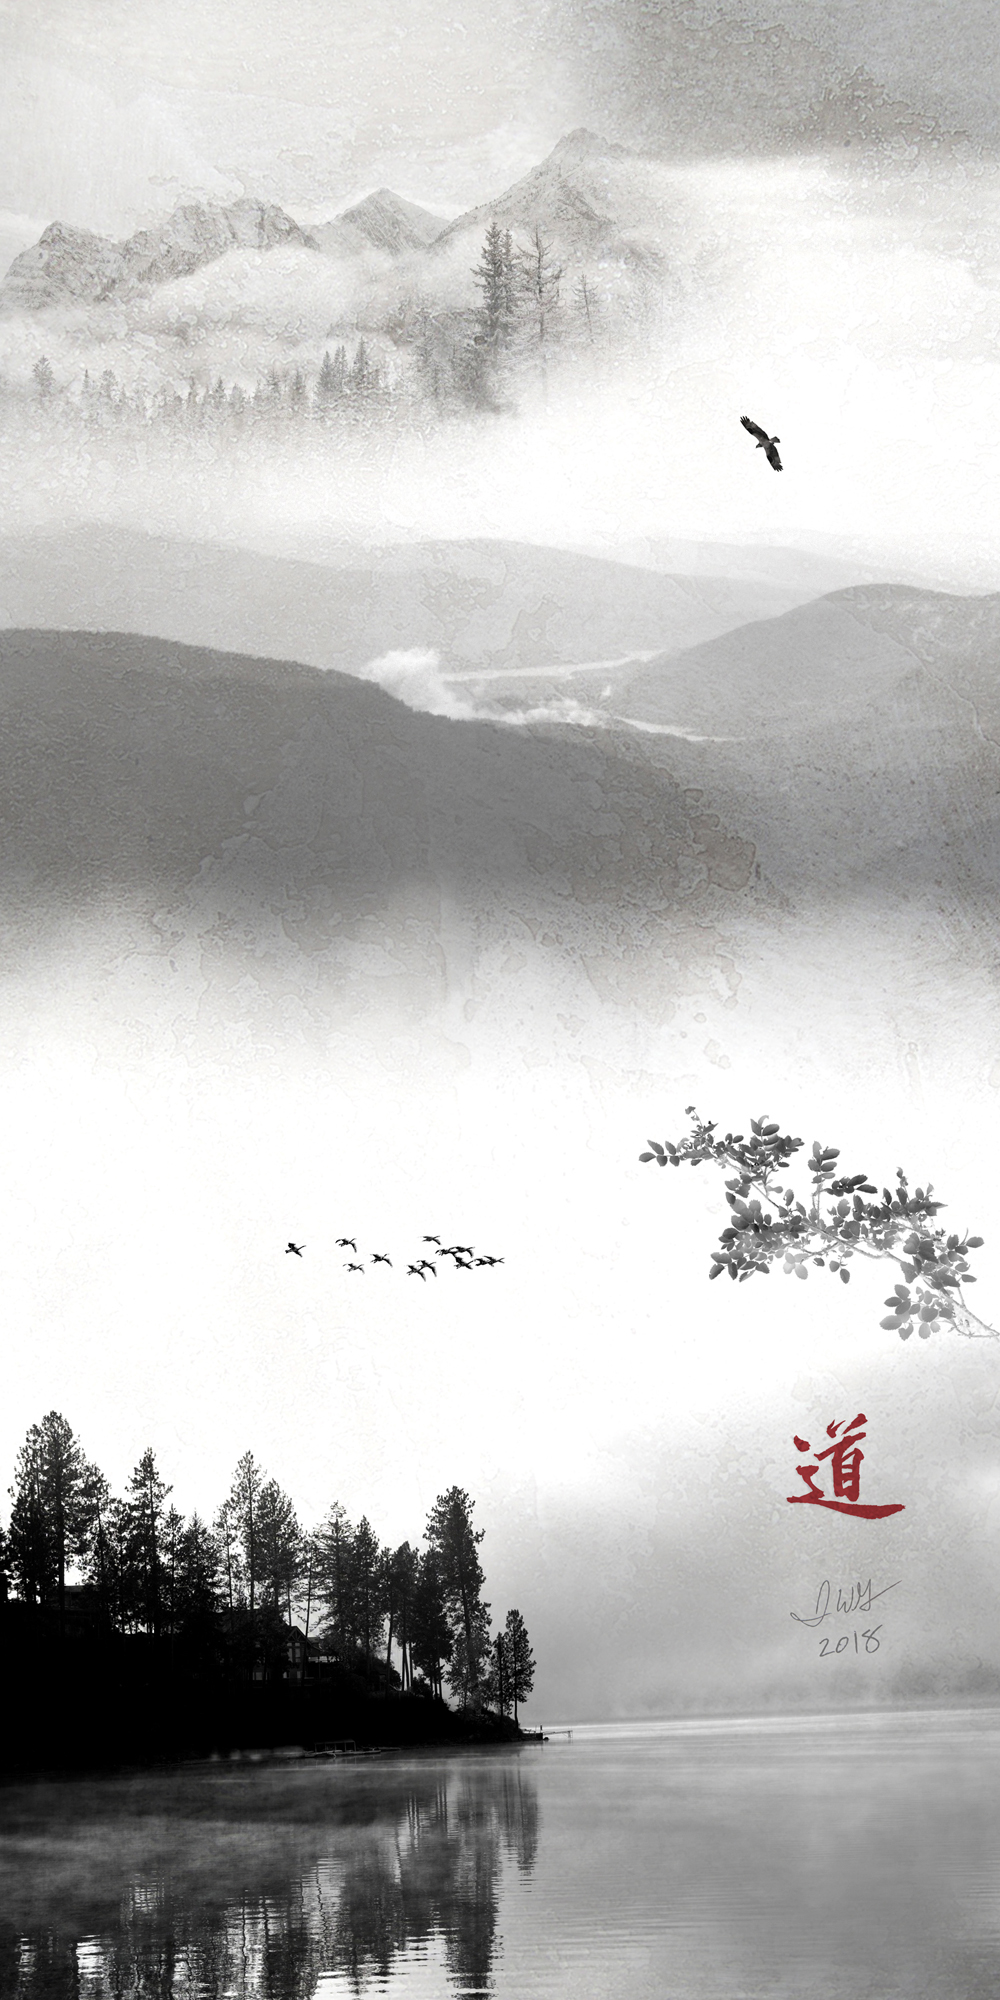 Composite black and white photograph modeled after a chinese landscape painting. This is a composite image that combines elements from six photographs starting with the lake in the foreground, the flock of geese in a low cloud, and a mountain and river scene leading up to a snowy peak.